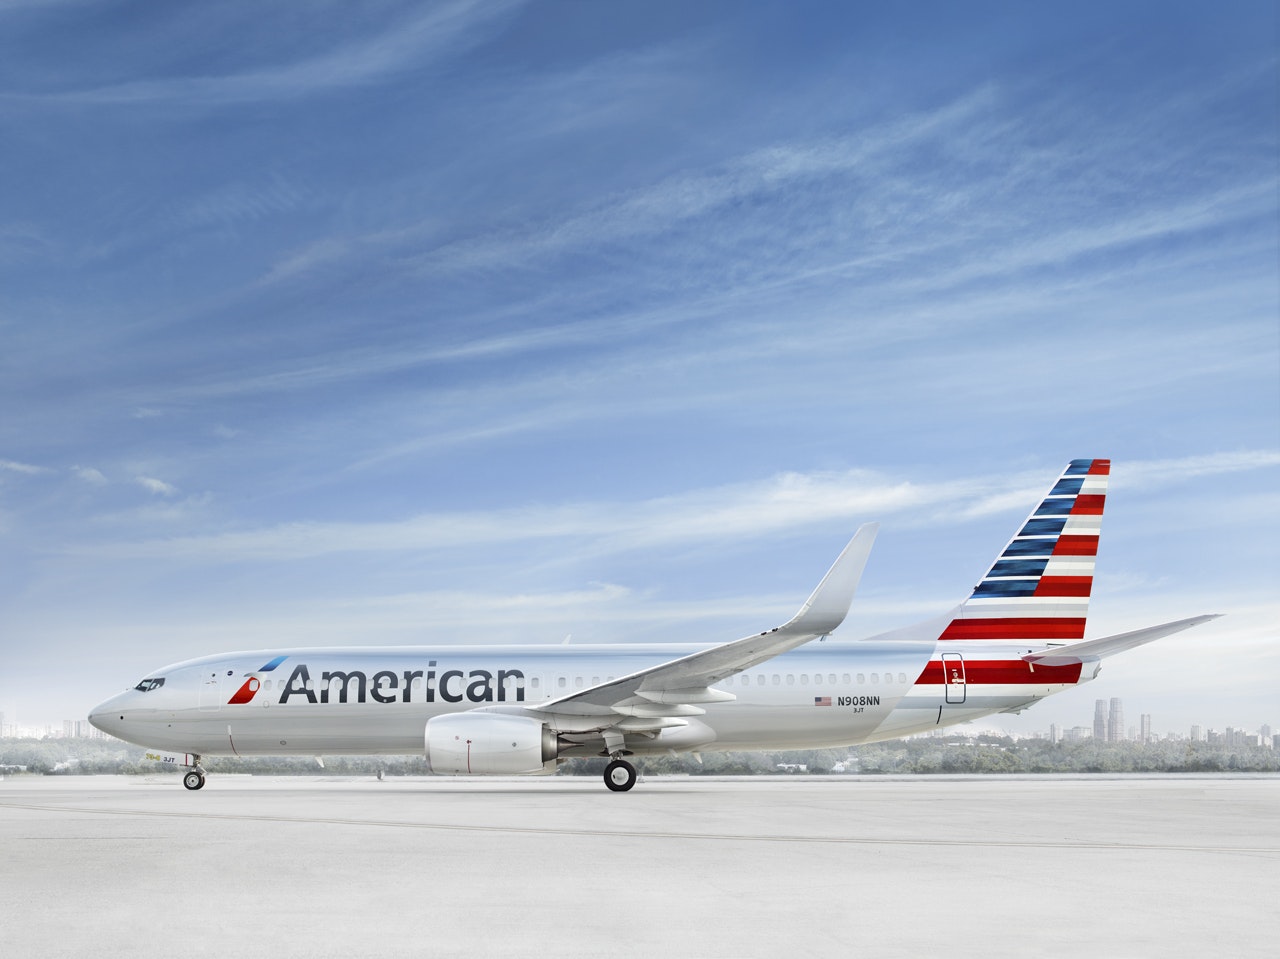 Exterior of an American Airlines Boeing 737-Max plane in front of a cloudy blue sky